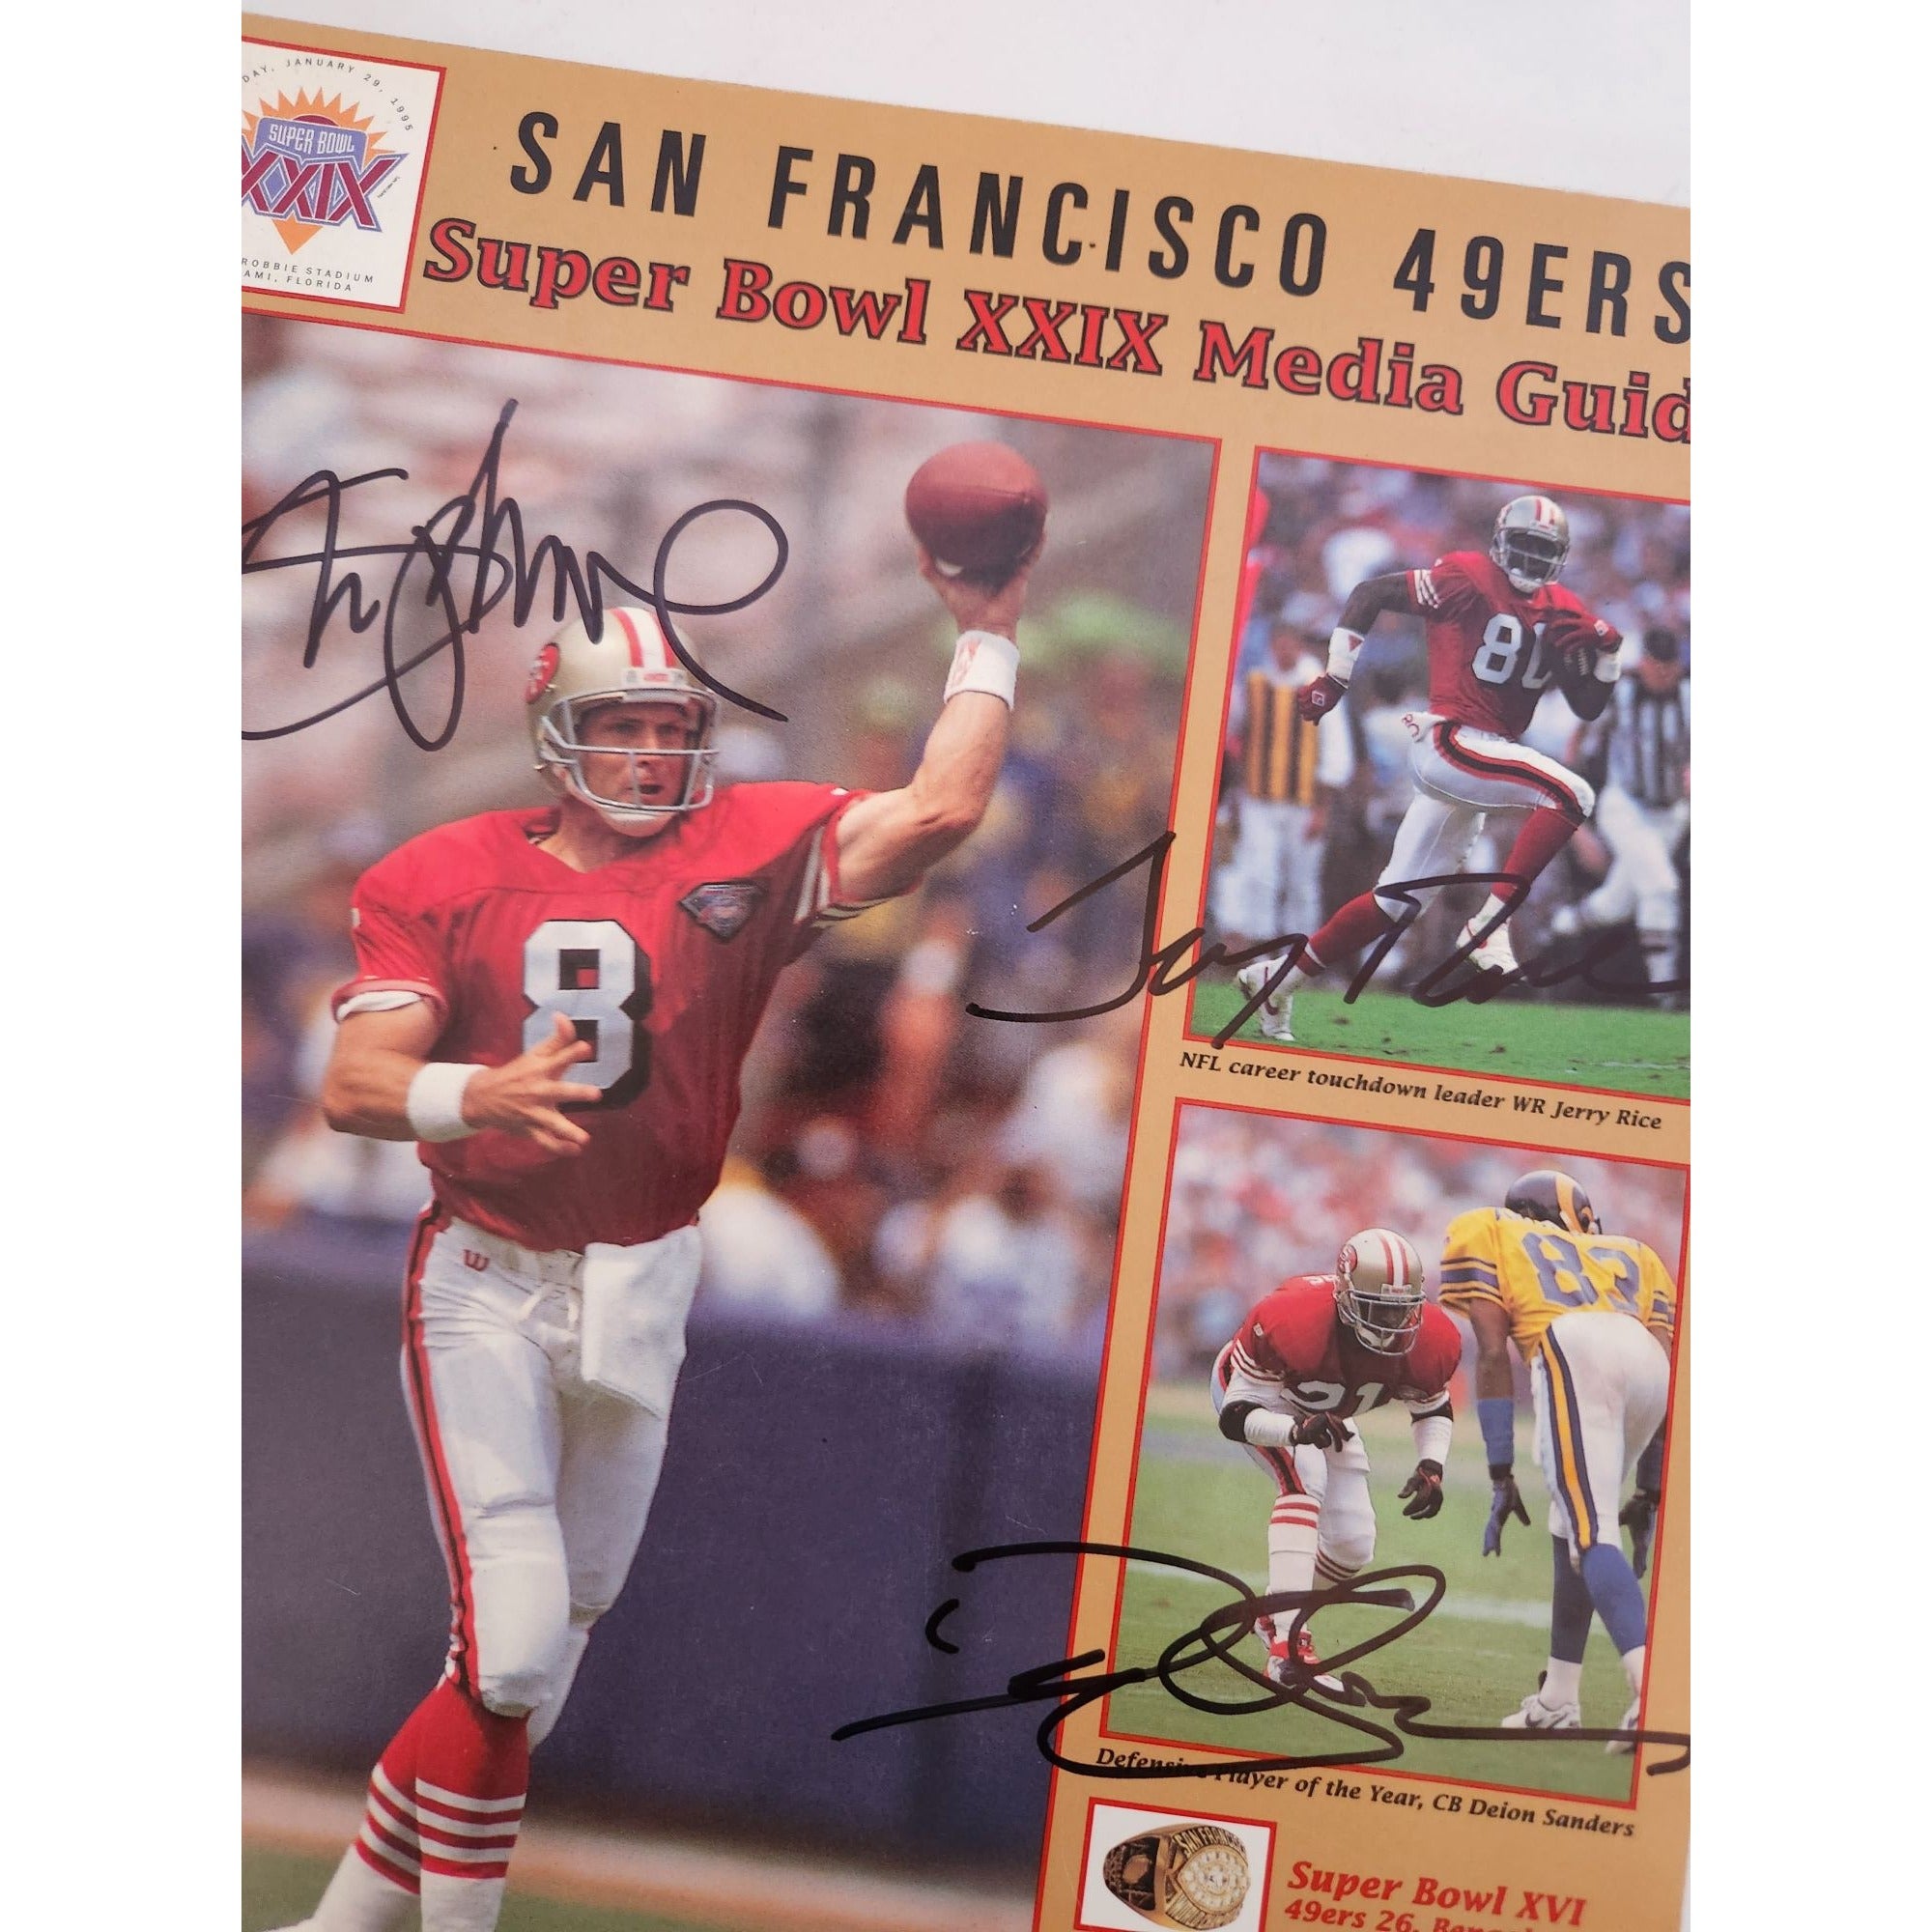 San Francisco 49ers Super Bowl 29 media guide Steve Young Jerry Rice Deion Sanders signed